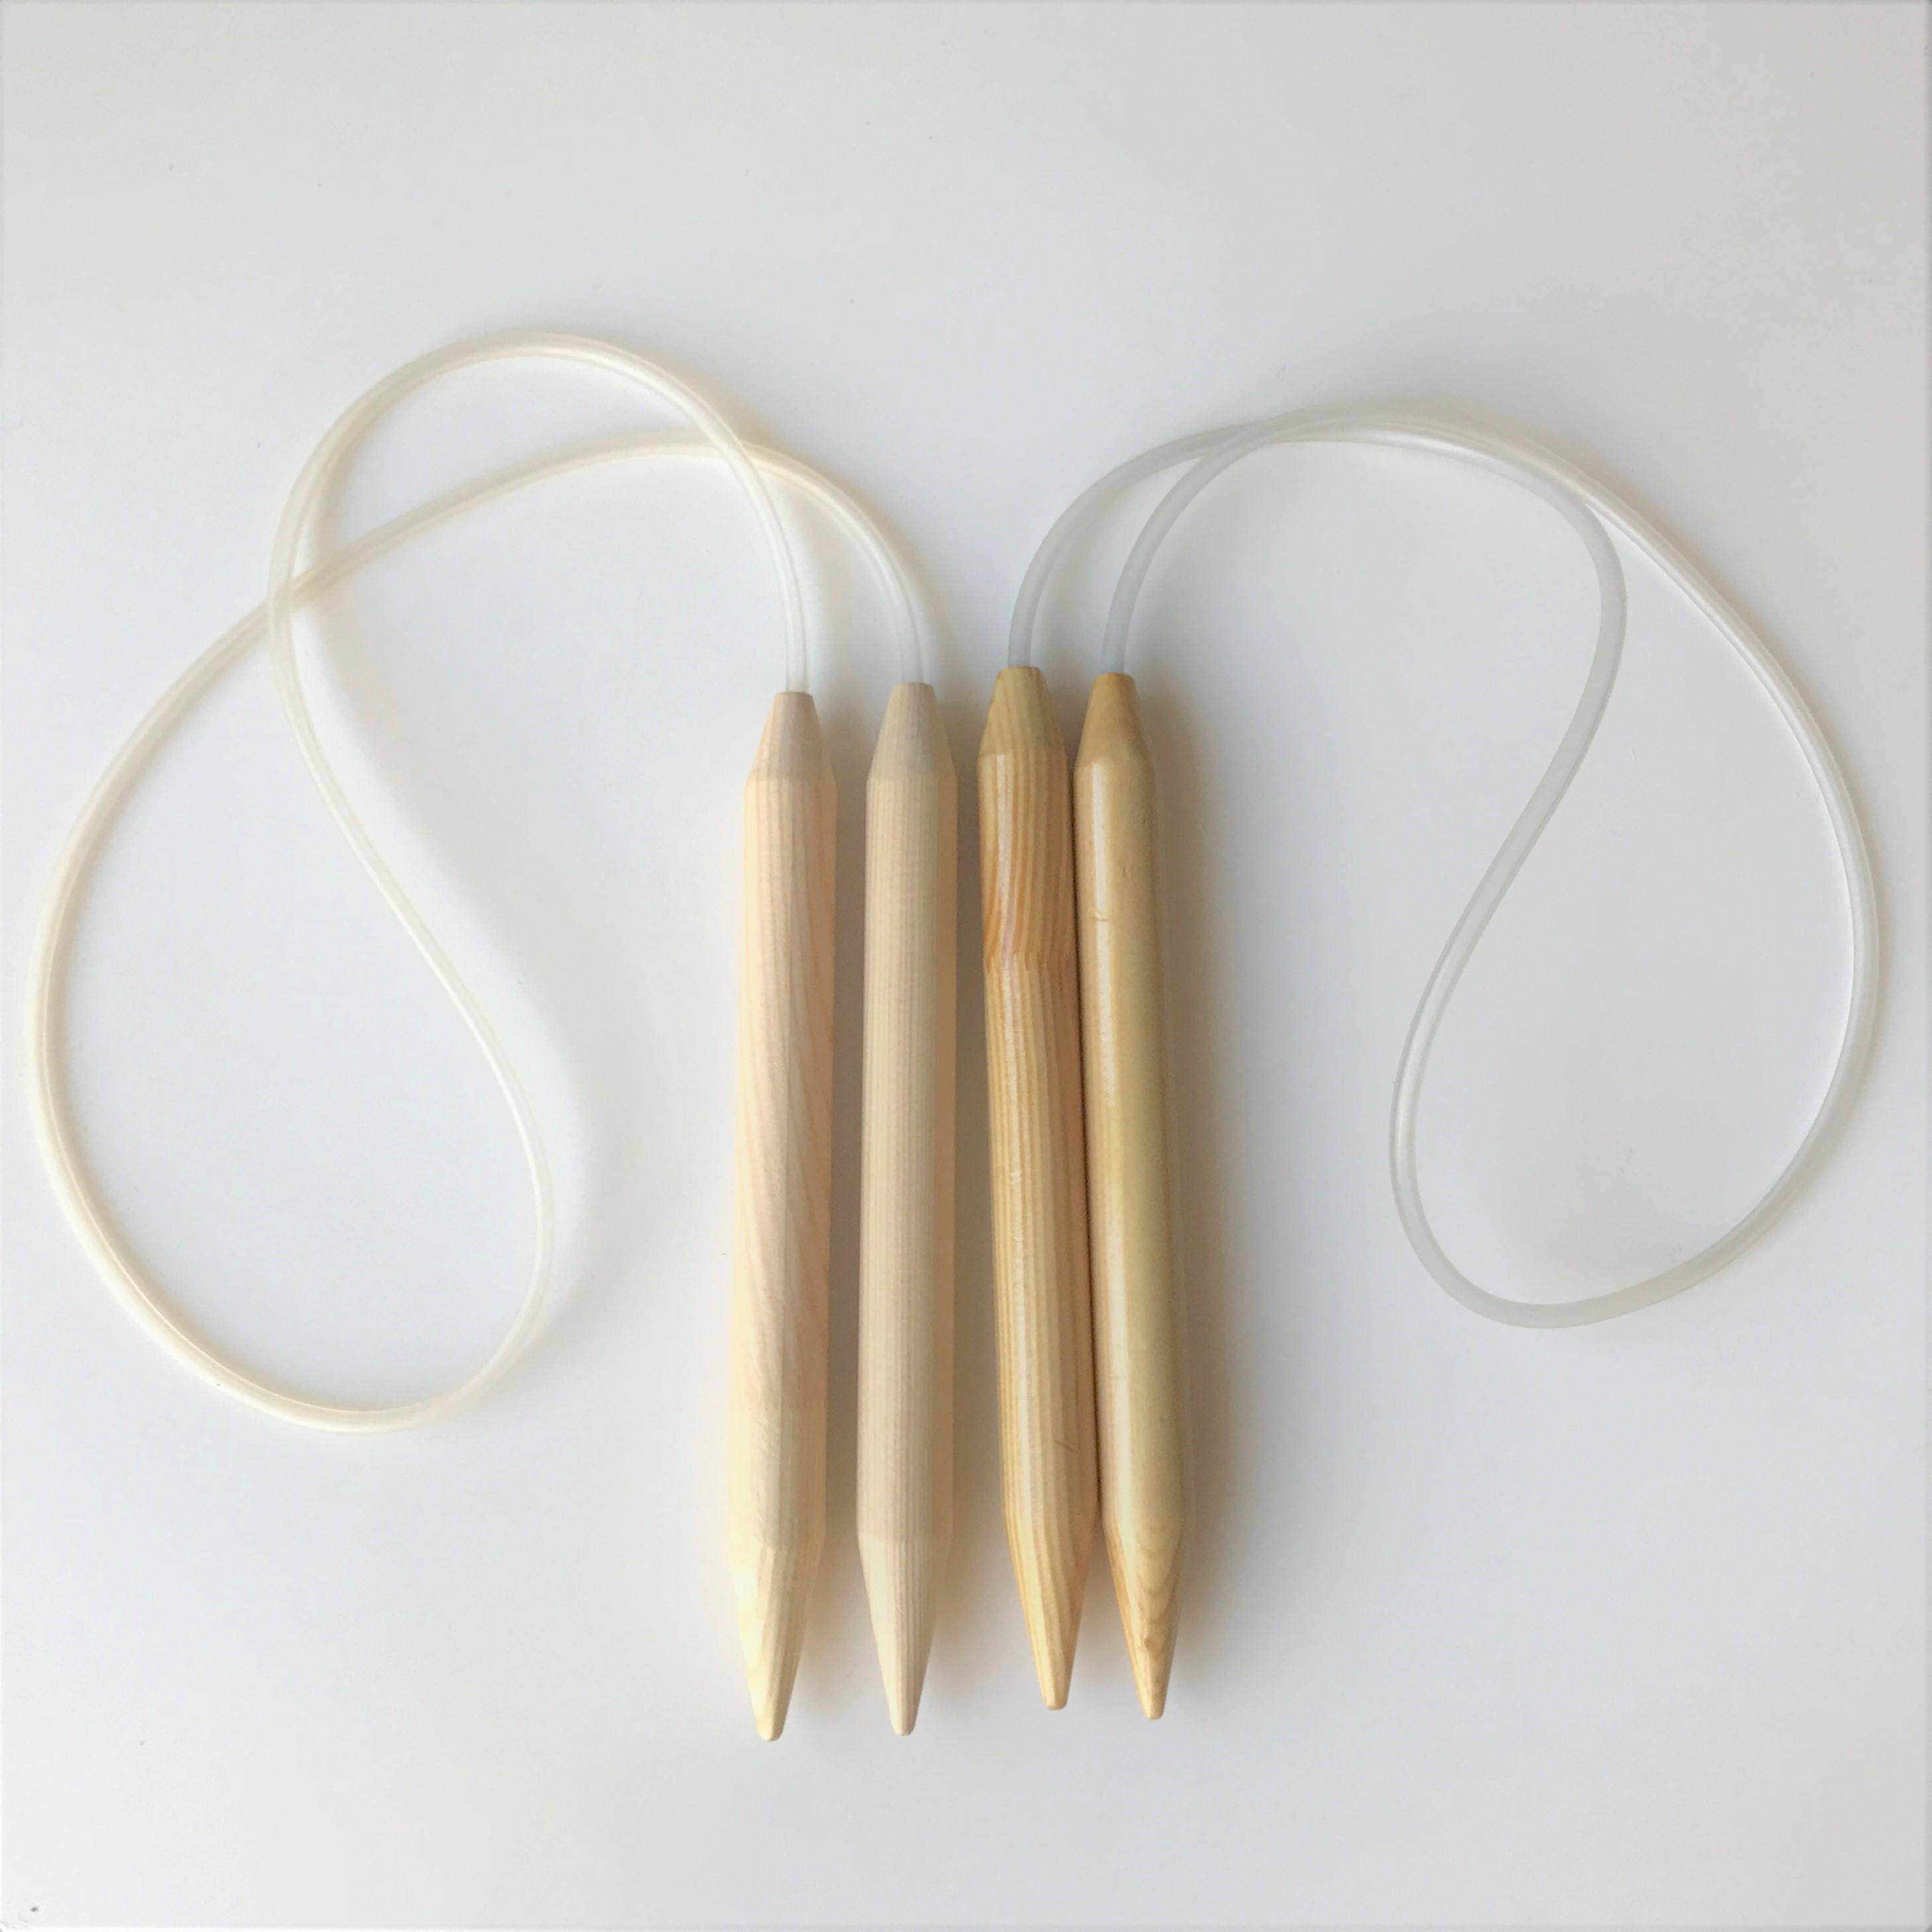 Wooden Circular Knitting Needles, Large US Size 35 20mm us35, 20 Mm,  Handmade for Chunky Yarn 